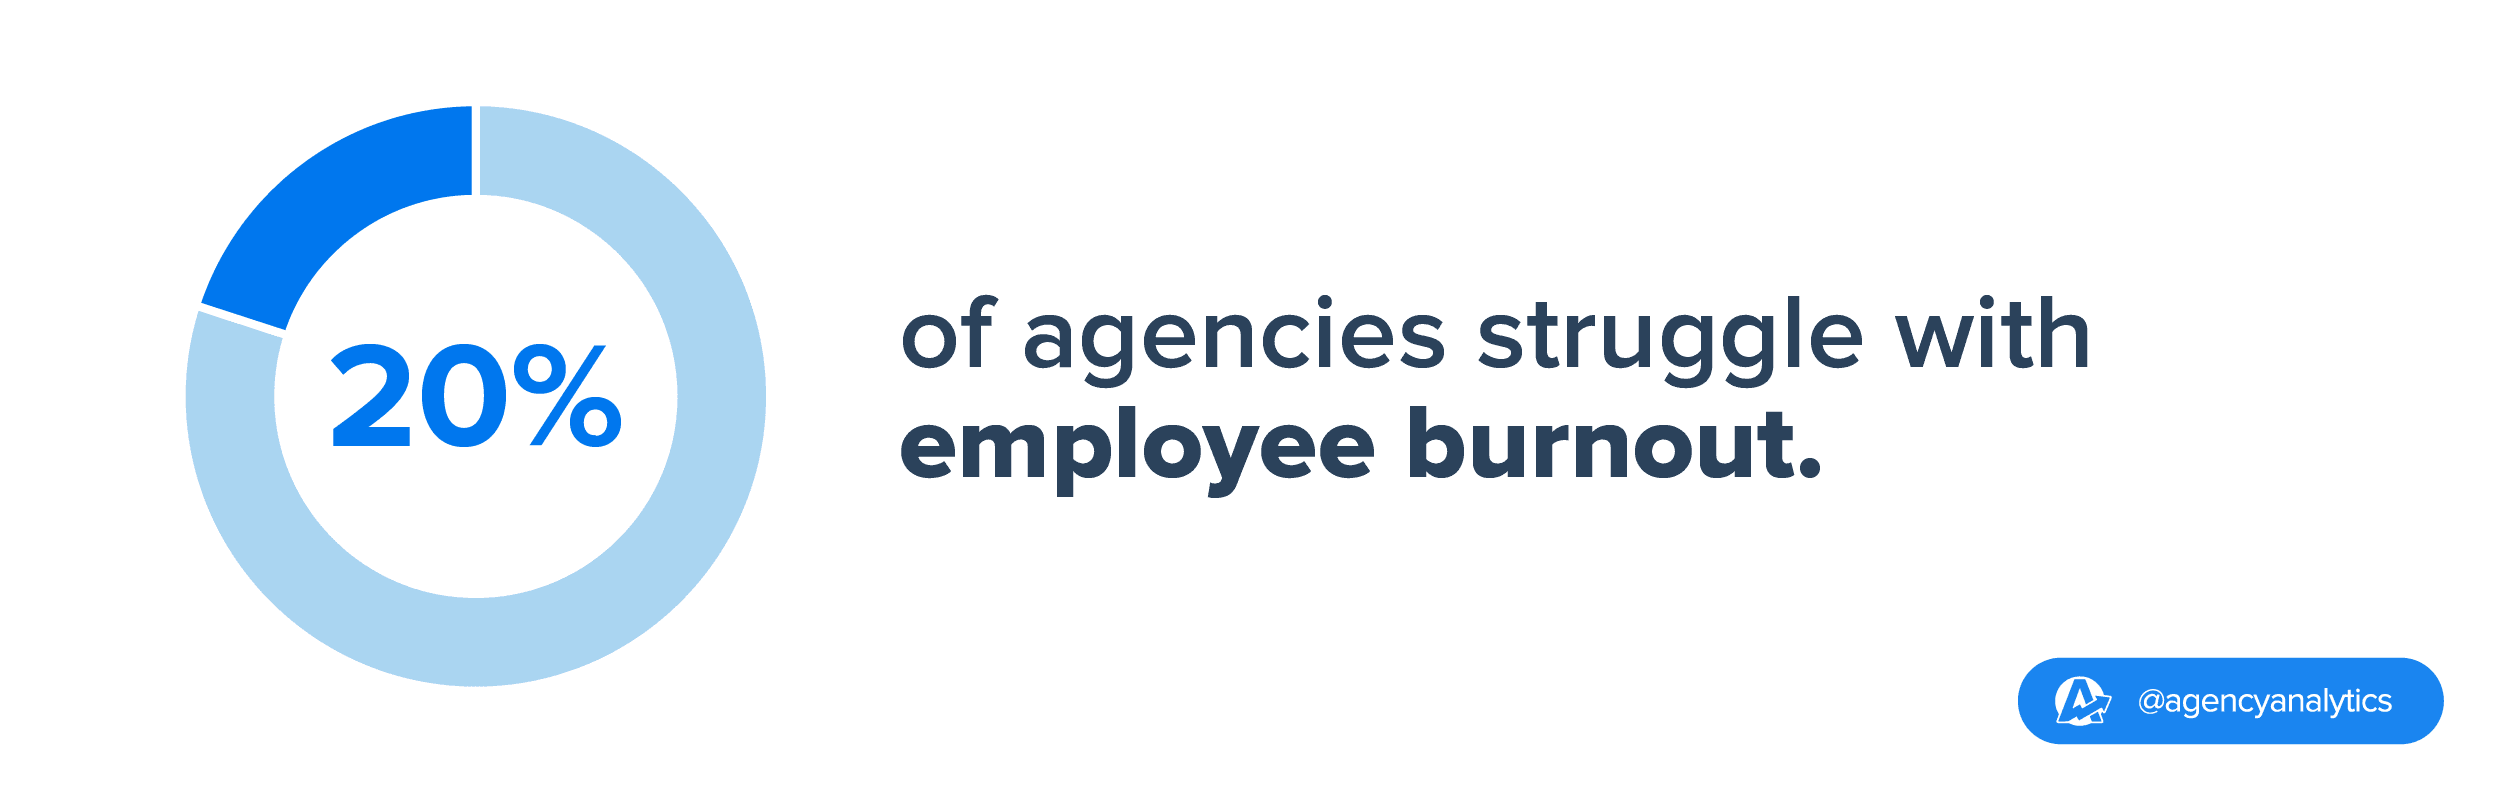 Employee burnout emerges as the second most common challenge